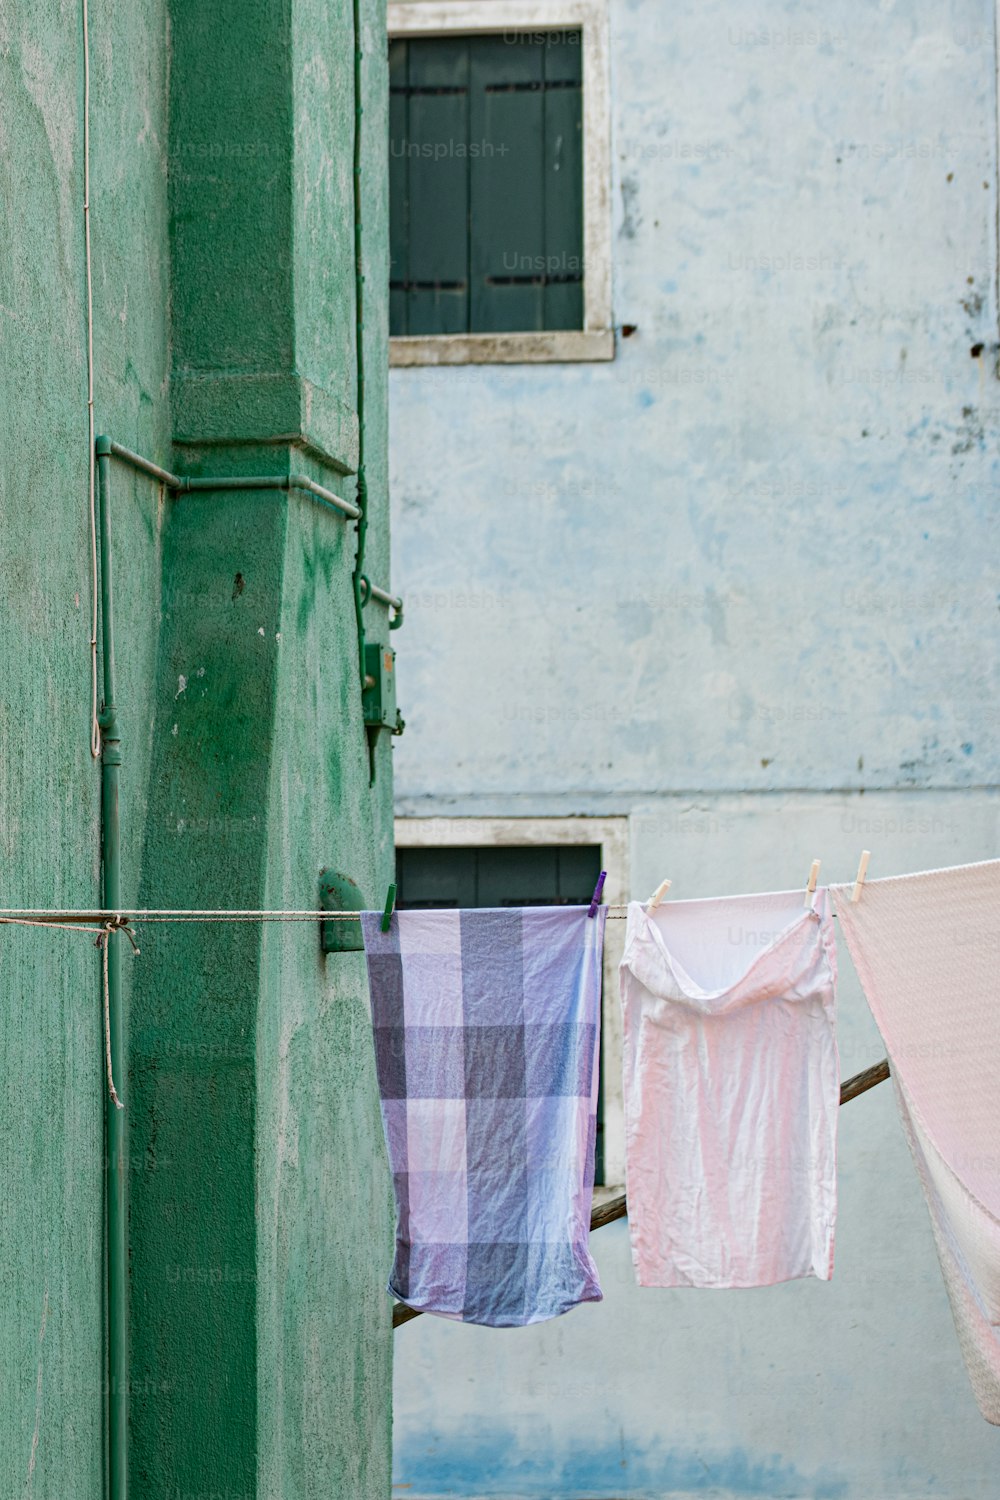 Clothes hanging out to dry on a clothes line photo – Free Matamata Image on  Unsplash